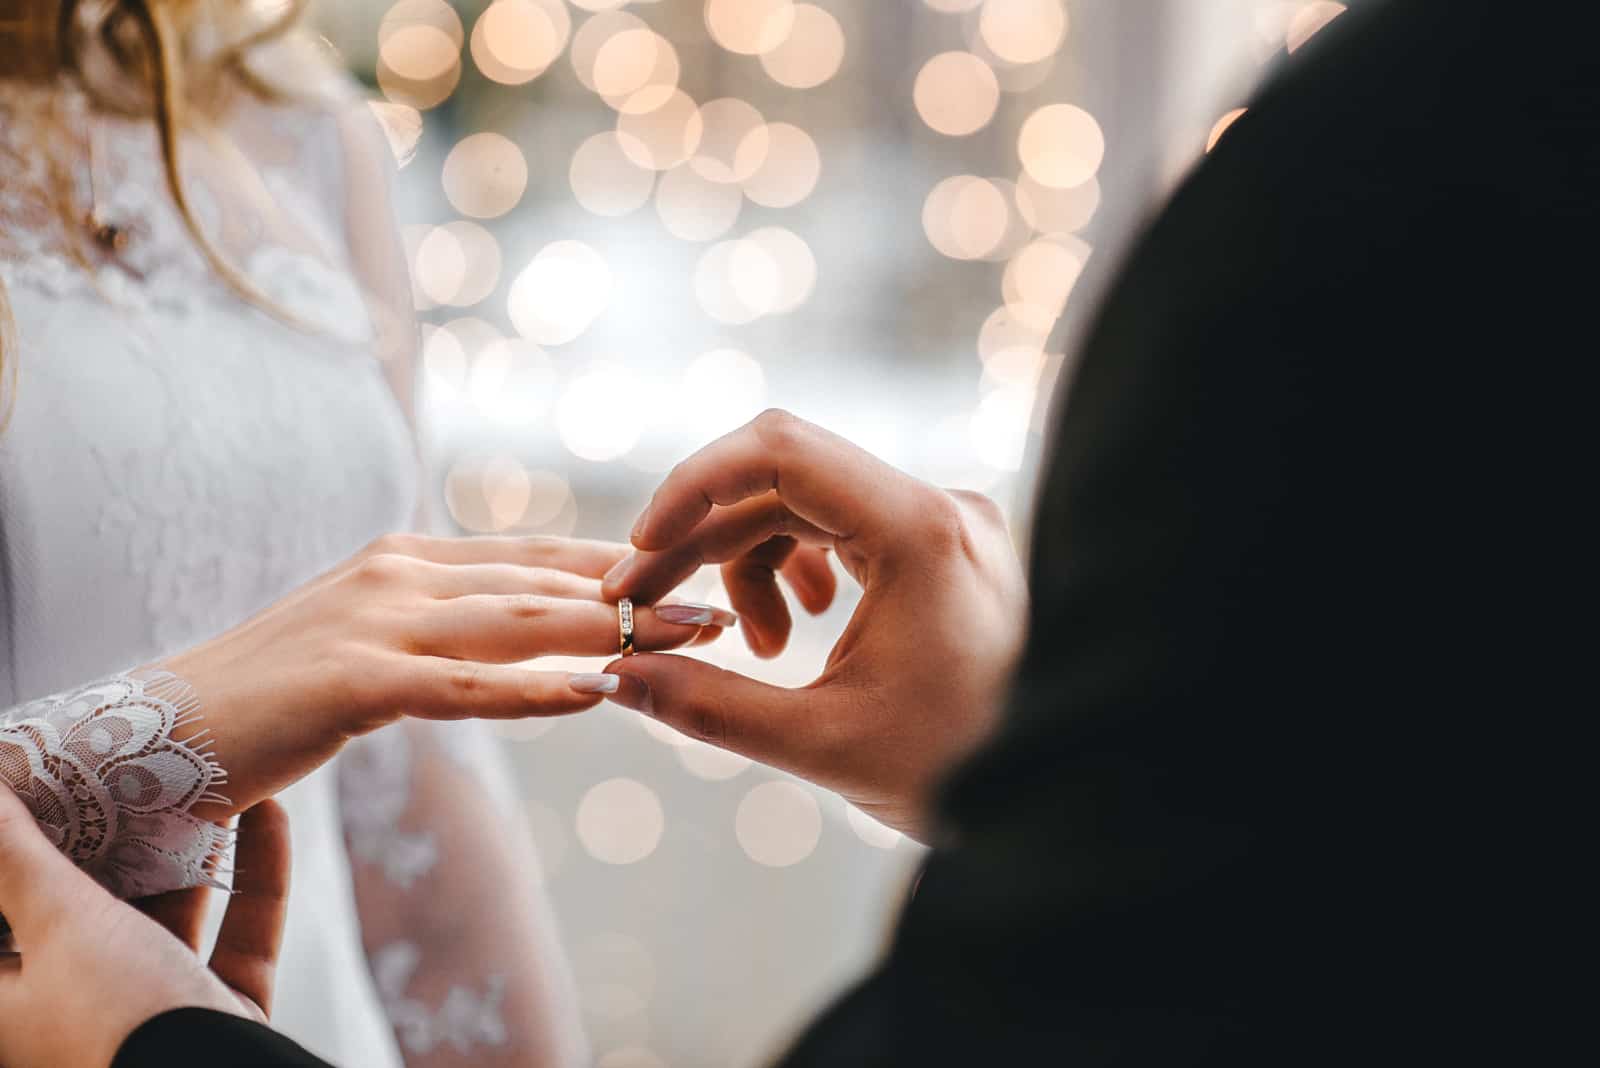 the groom putting a wedding ring on bride's finger